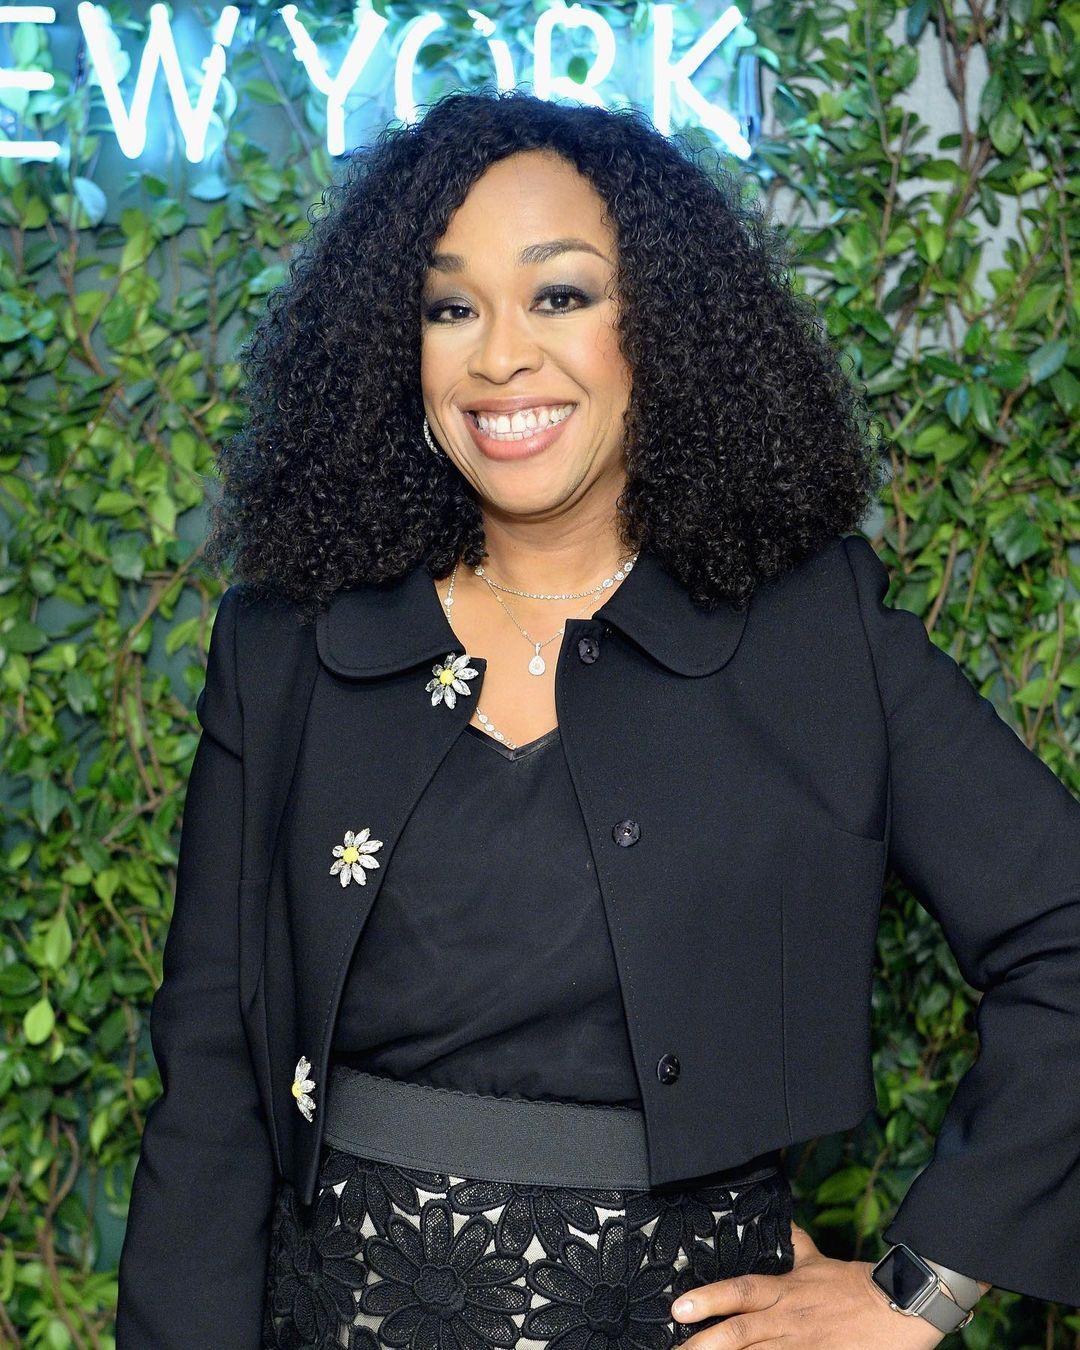 A photo showing Shonda Rhimes in an all-black outfit.